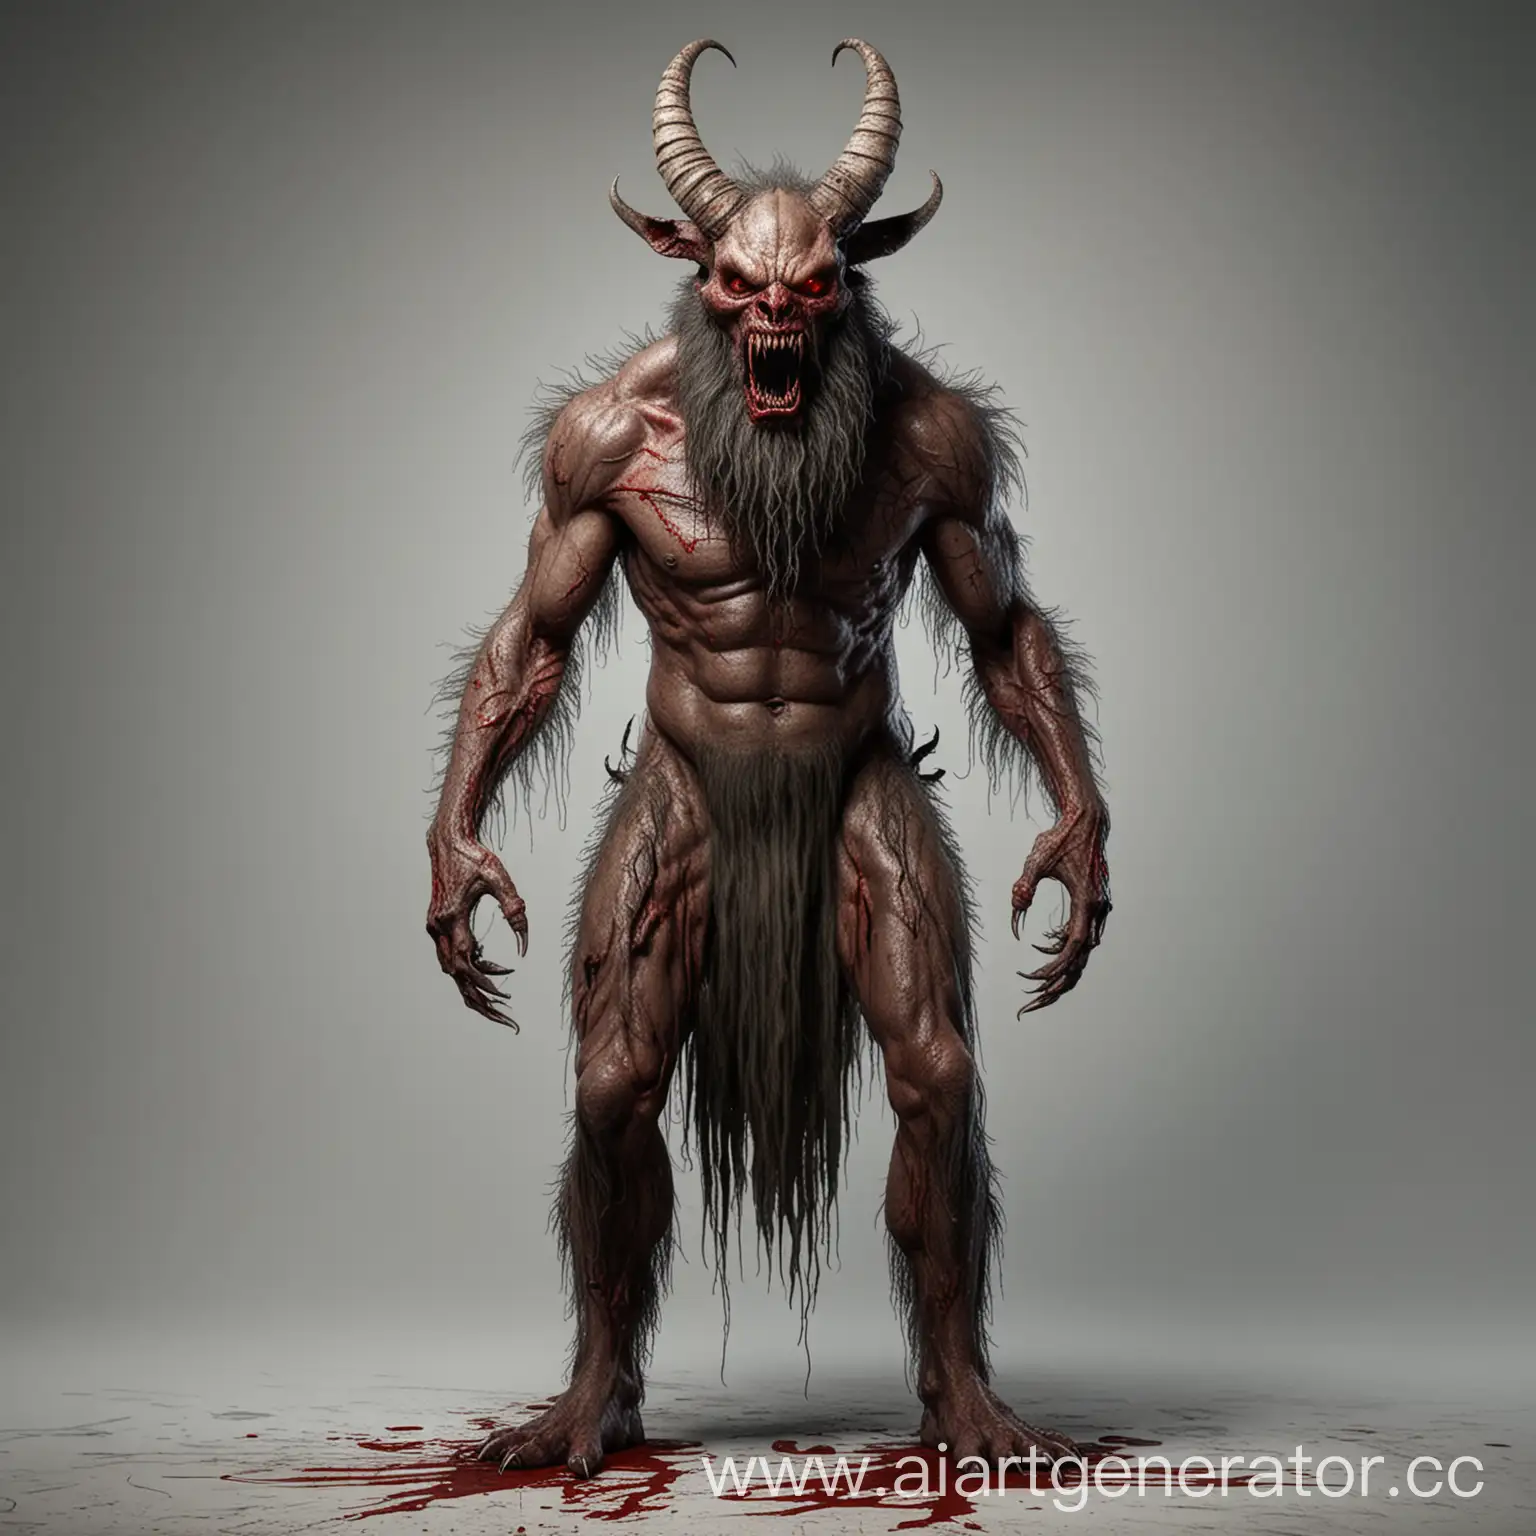 Terrifying-Horned-Monster-Stands-Tall-with-Gory-Beard-and-Sharp-Teeth